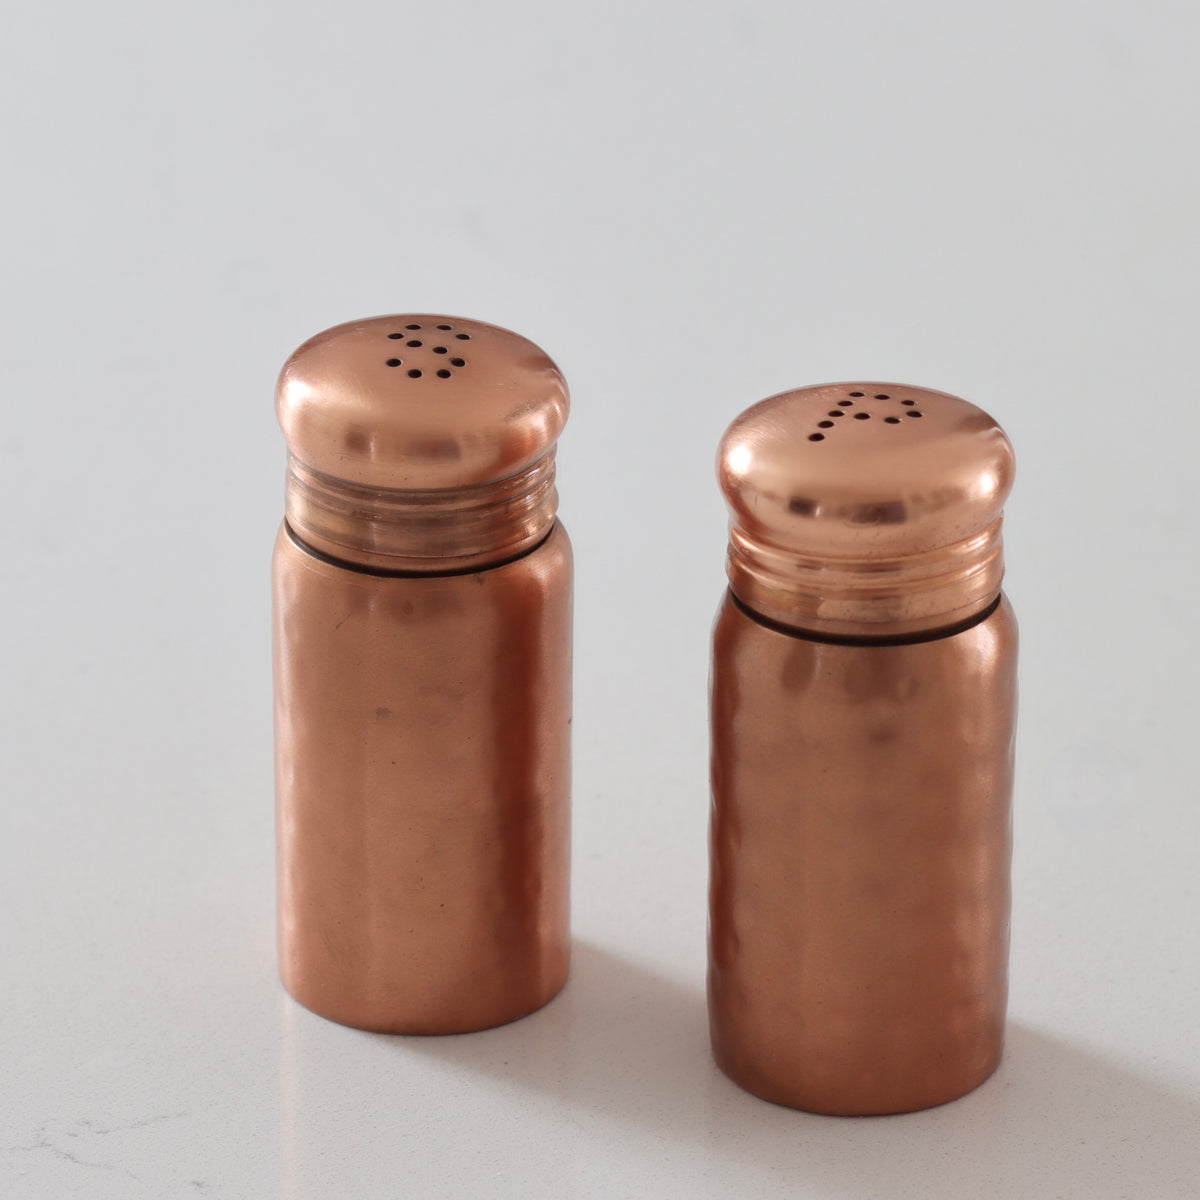 Hammered Copper Finished Stainless Steel Salt and Pepper Shakers - Holistic Habitat 